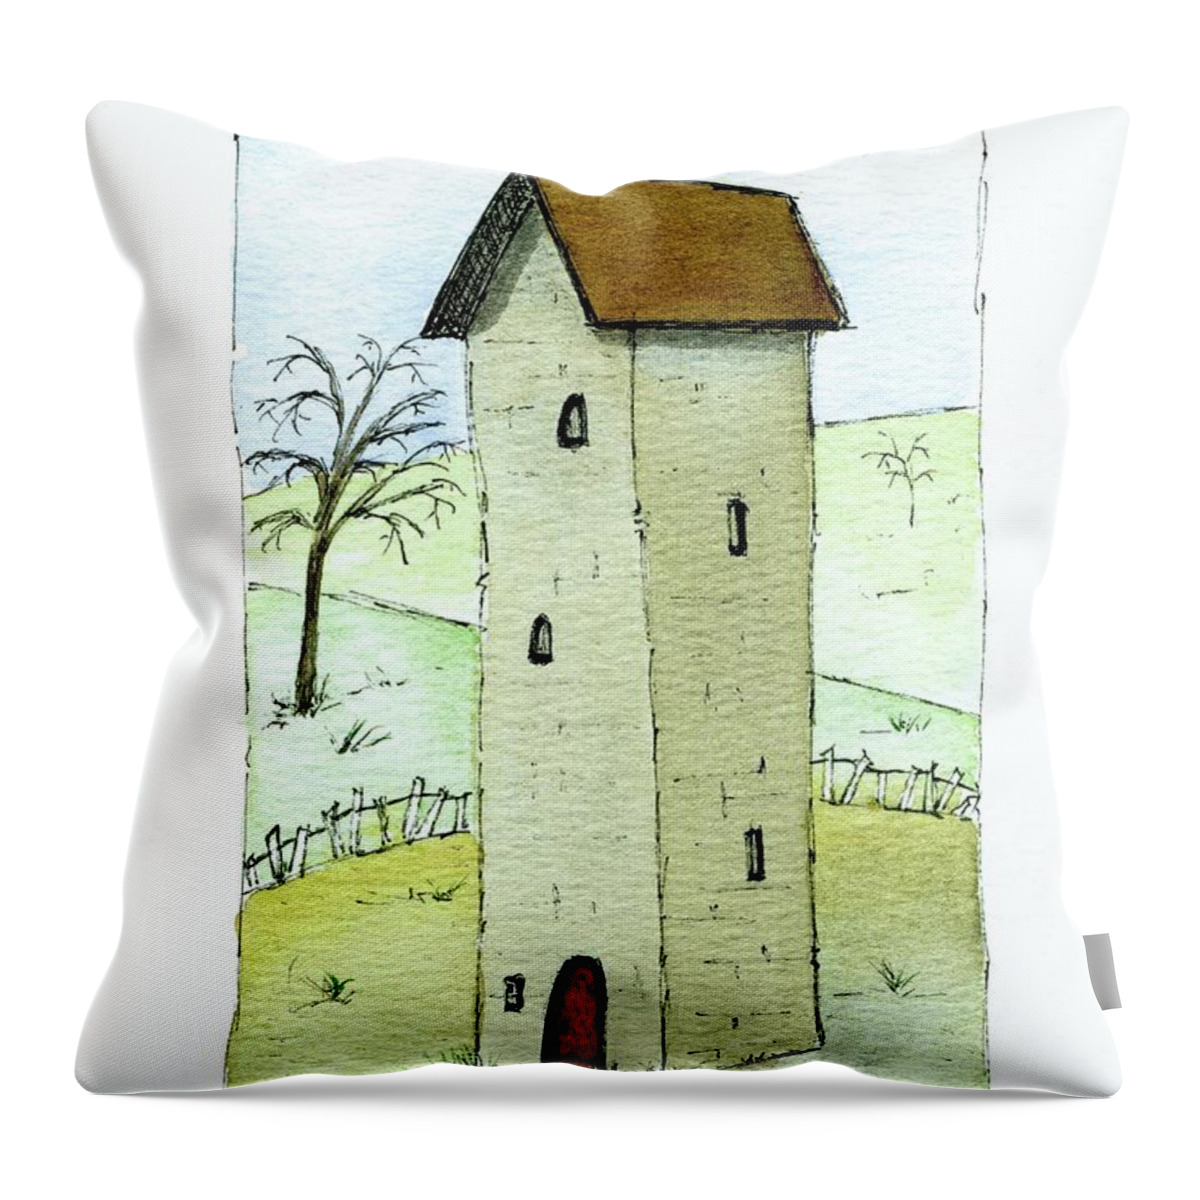 Whimsical House Painting Throw Pillow featuring the painting Whimsical Tall House by Donna Mibus